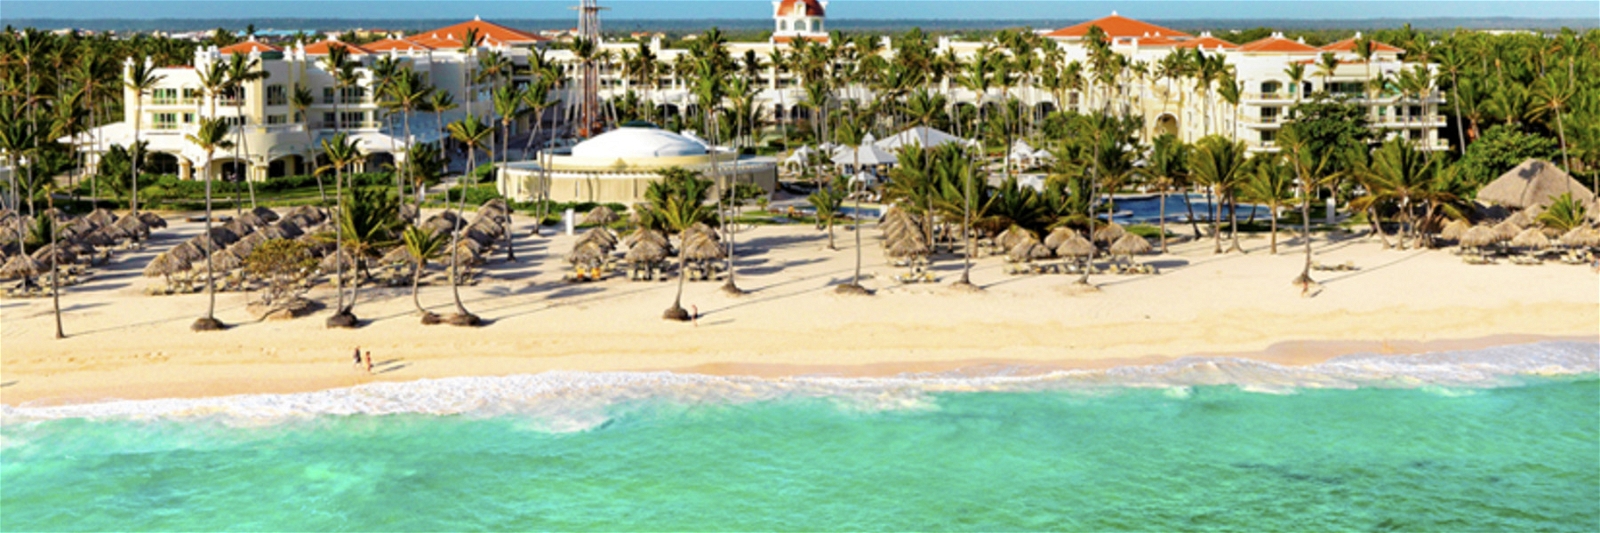 Golf Vacation Package - Iberostar Grand Bavaro - Luxury All-Inclusive + Great Golf from $435 per day!